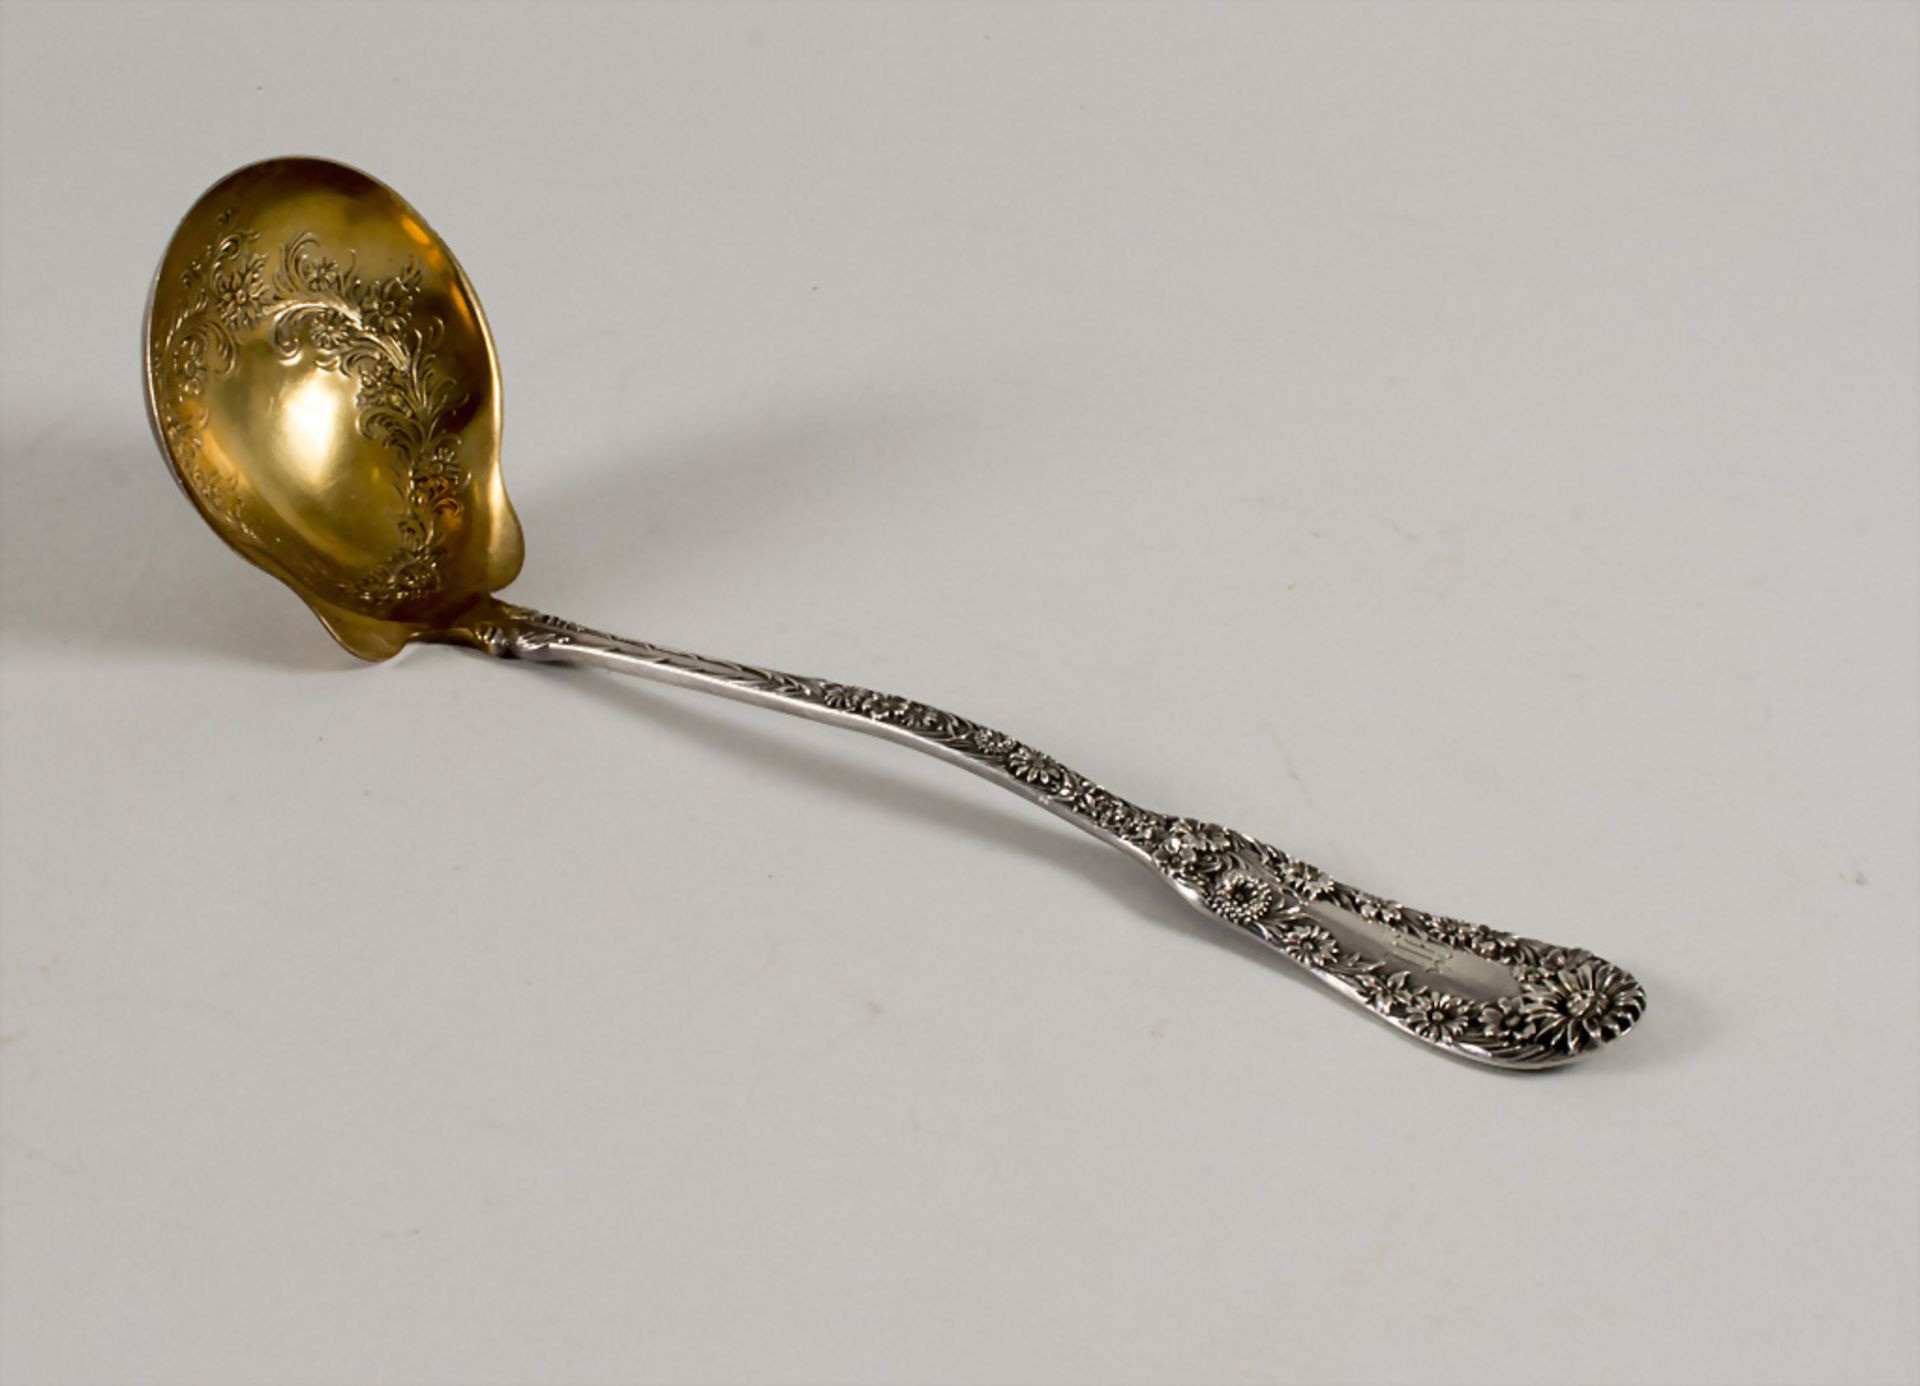 Suppenkelle 'No. 10' / A silver blossom soup ladle 'No. 10', Dominick & Haff, New York, um 1896 - Image 7 of 7